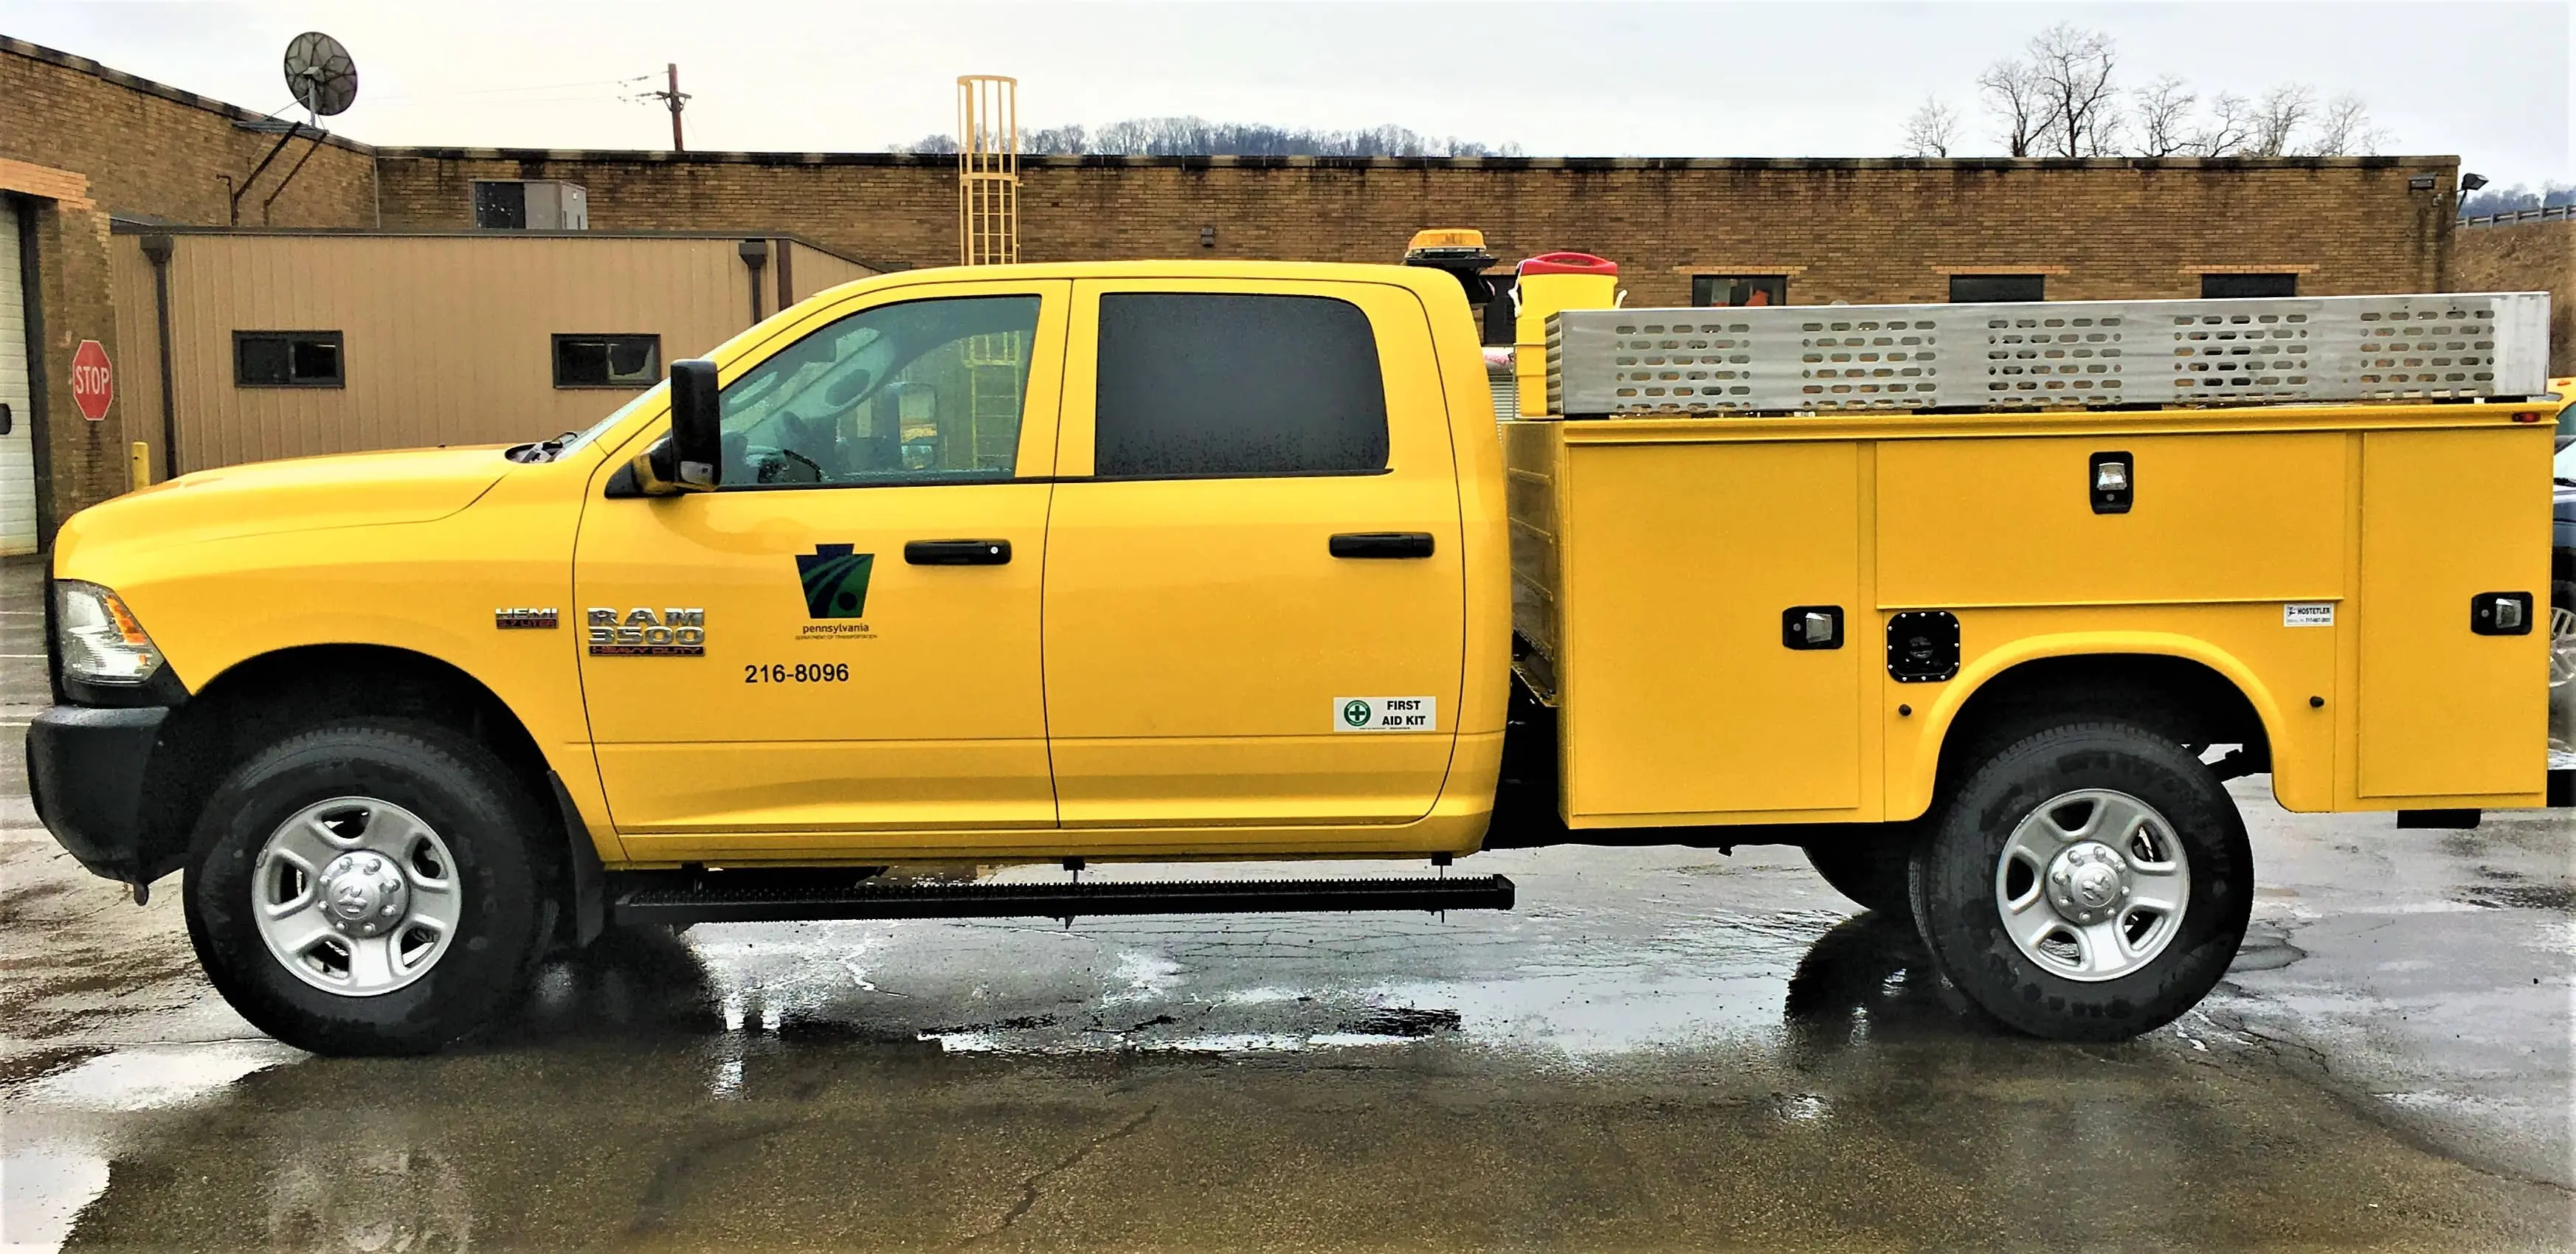 A yellow Dodge Ram 3500 crew cab truck is shown with a modified utility bed including locking compartments for tool and equipment storage.